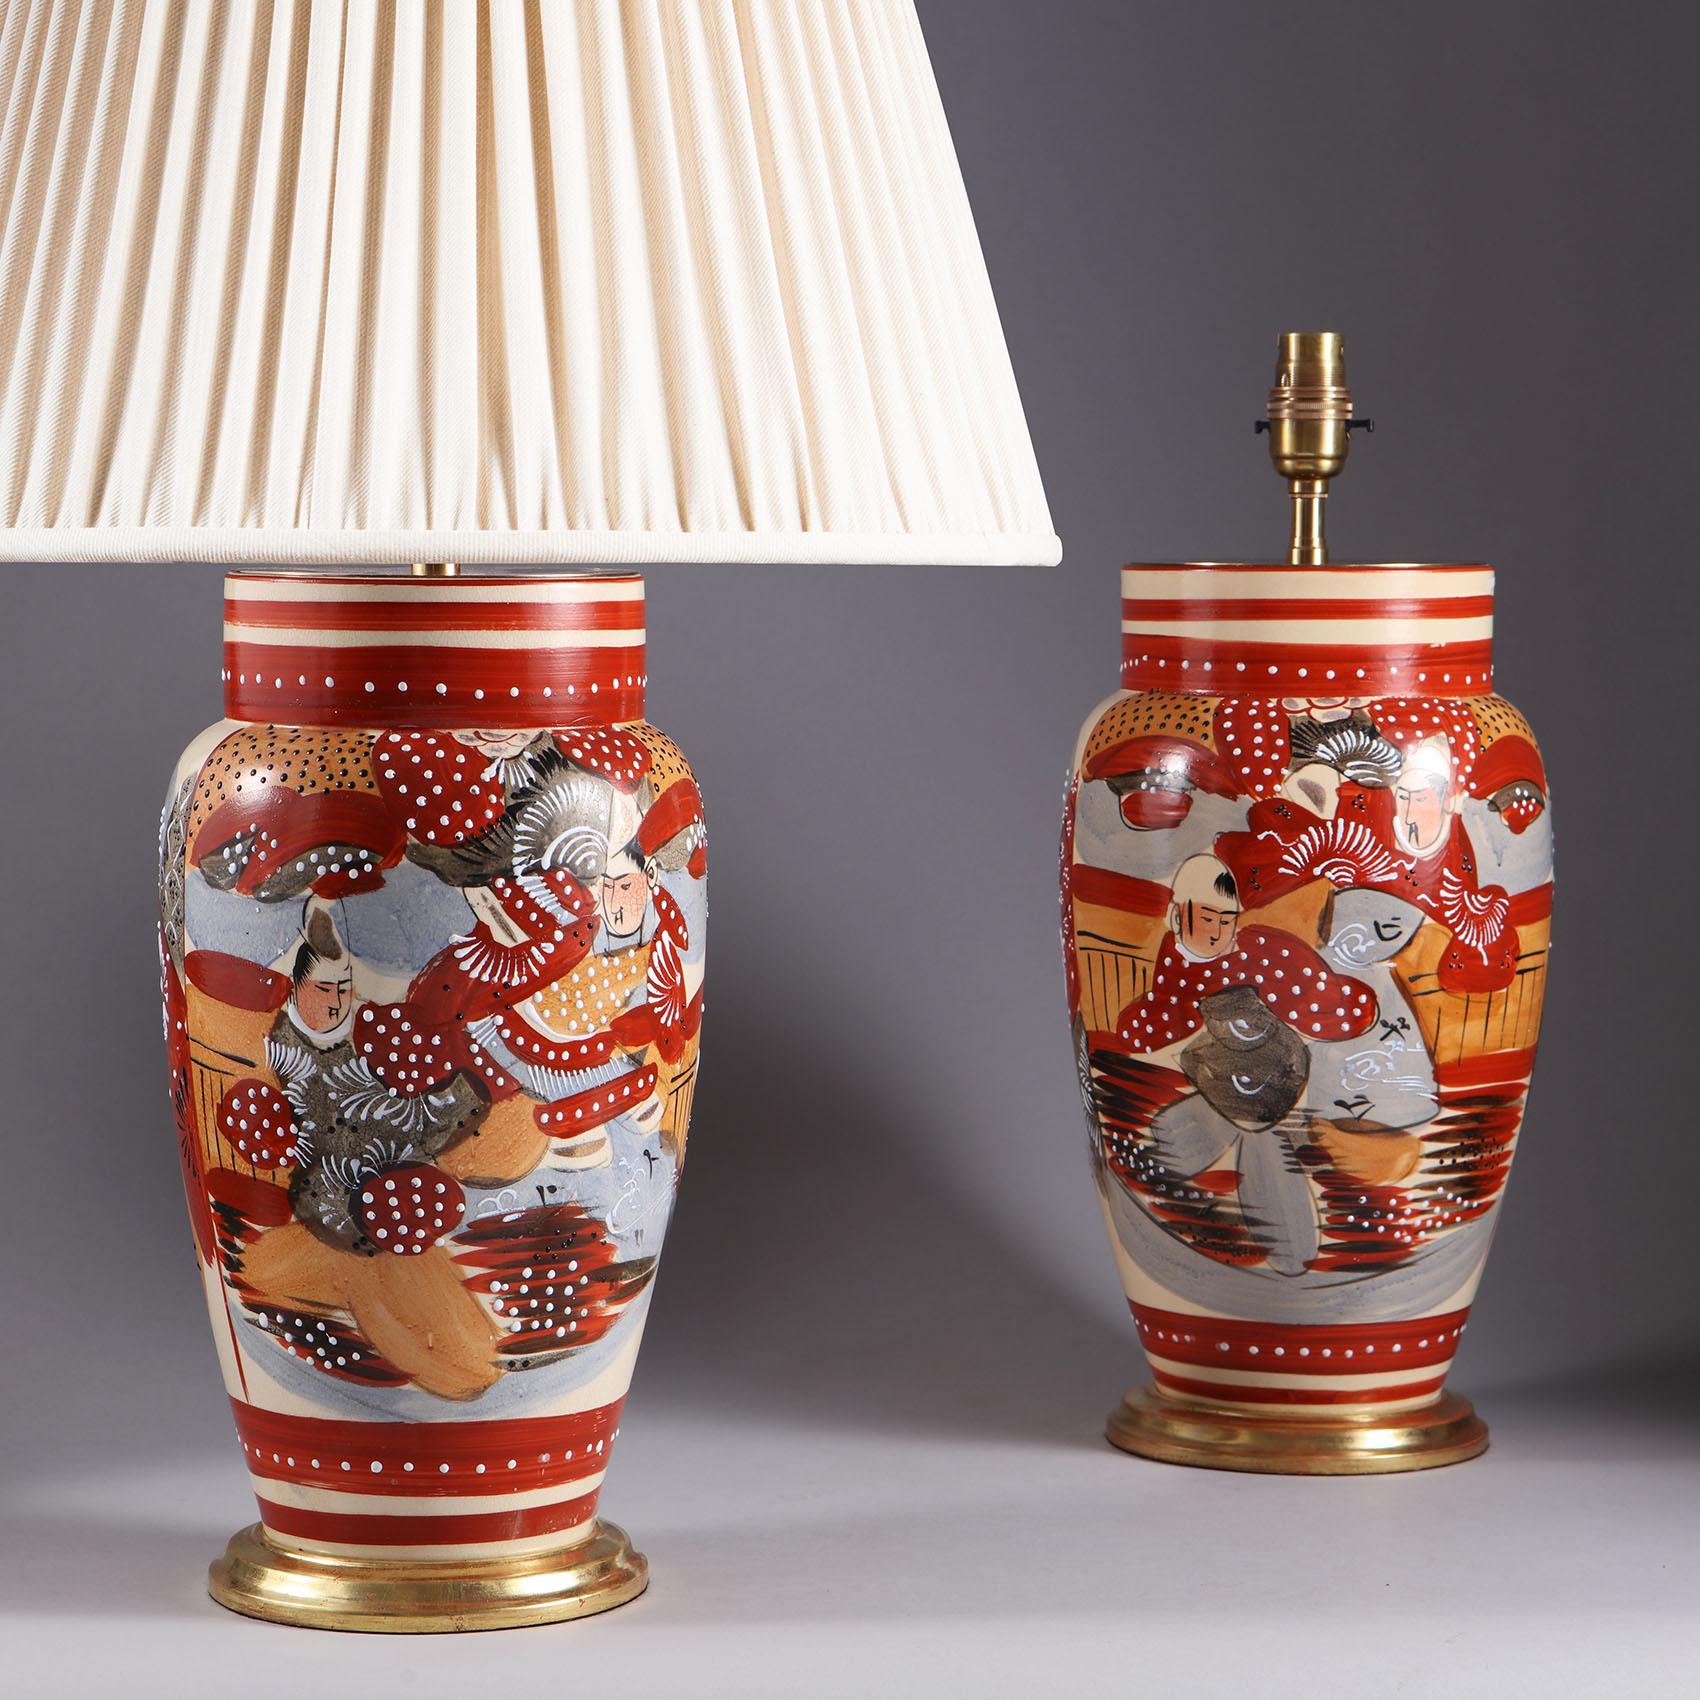 Decorative pair of Japanese 20th century vases mounted as table lamps, decorated with martial arts scenes painted in broad brushstrokes of reds, oranges and blues and picked out with raised white details, Now mounted as table lamps.
The vases,